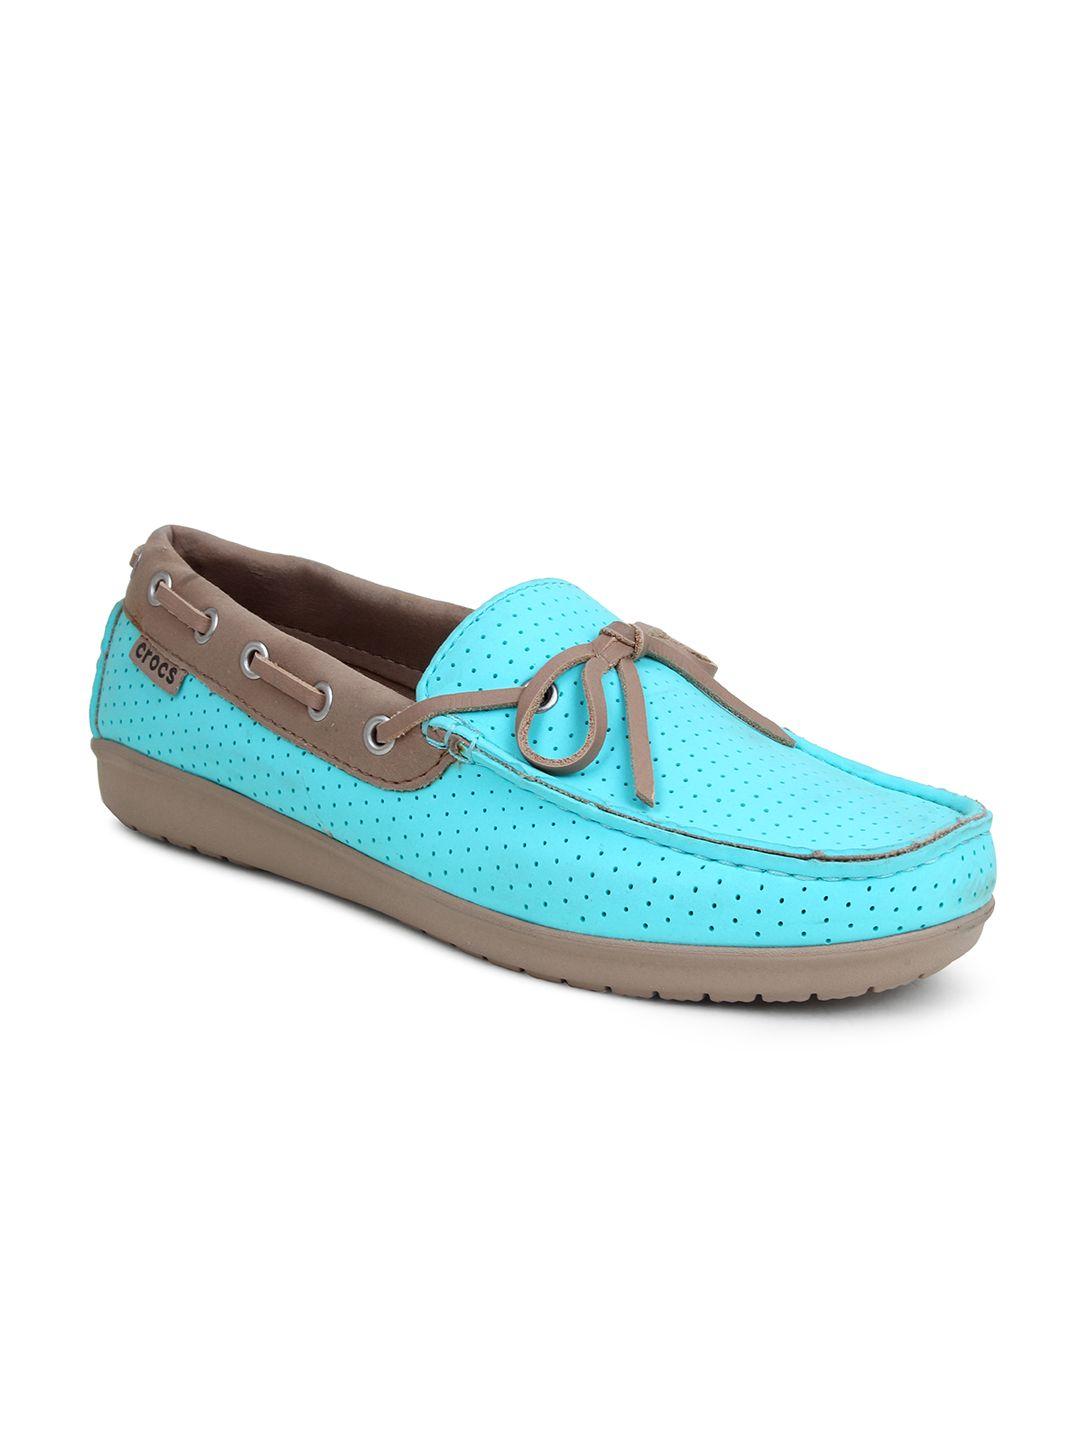 crocs-women-blue-perforated-loafers